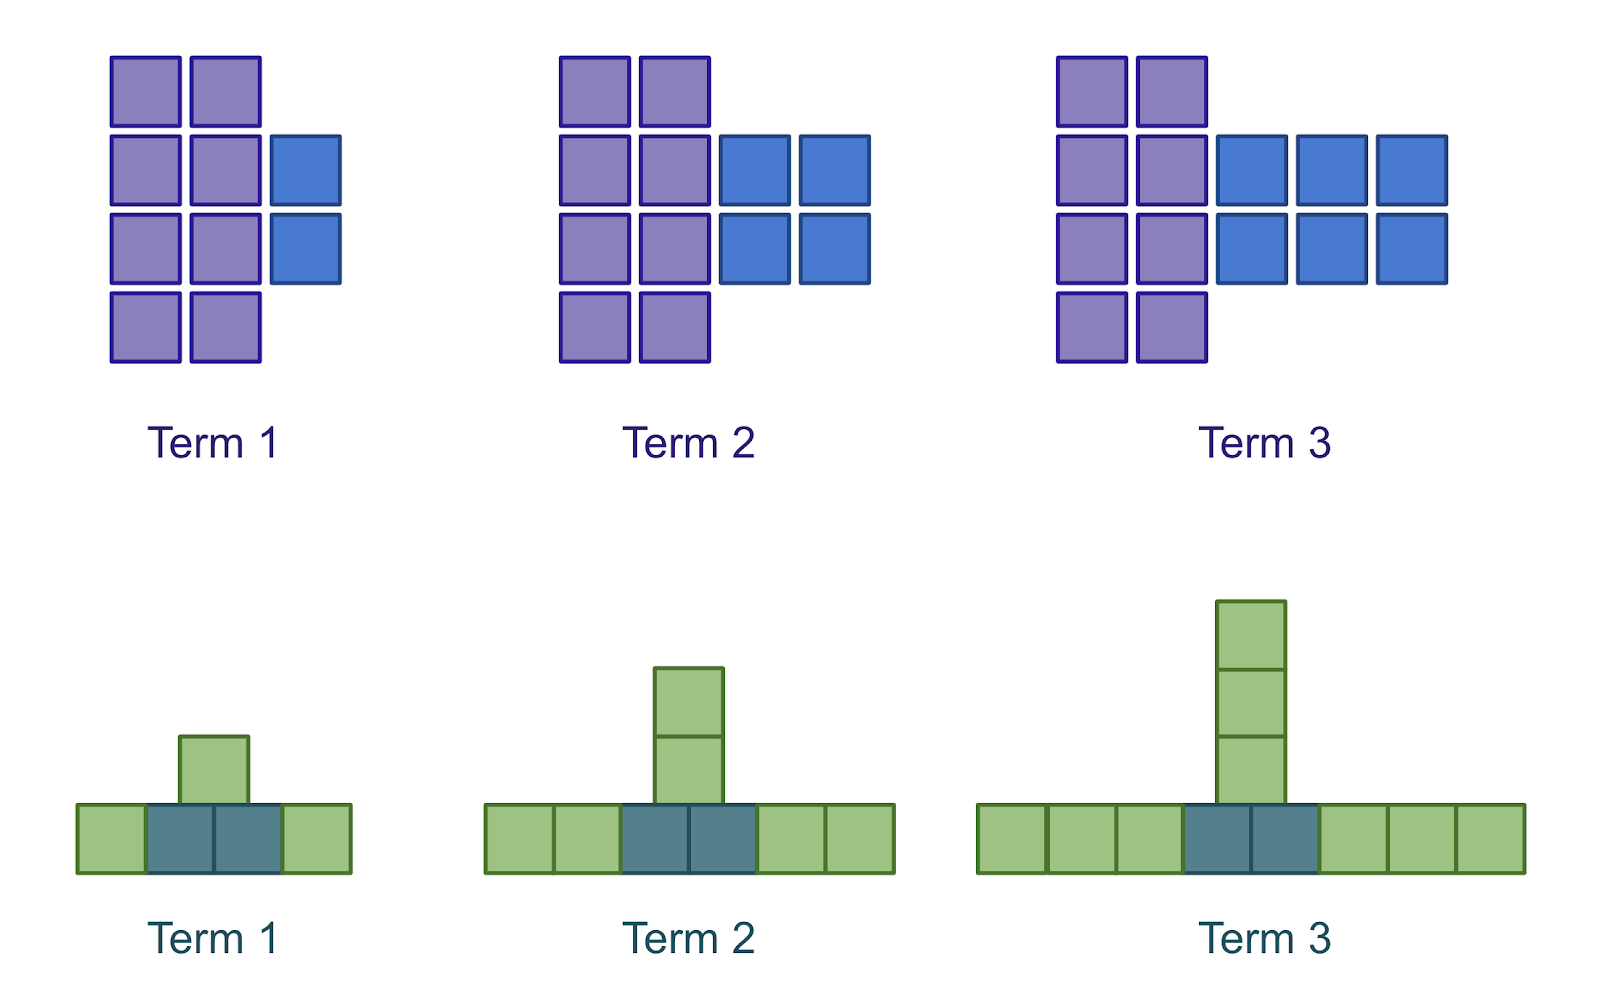 Two growing patterns represented visually by coloured squares. The first pattern is a 2x4 grid of squares with some blue squares attached to the right side. Term 1 is built of 10 squares, Term 2 is built of 12 squares, and Term 3 is built of 14 squares. The second pattern is a pair of squares, with squares on the left, right, and top growing outwards. Its Term 1 is built of 5 squares, Term 2 is built of 8 squares, and Term 3 is built of 11 squares.